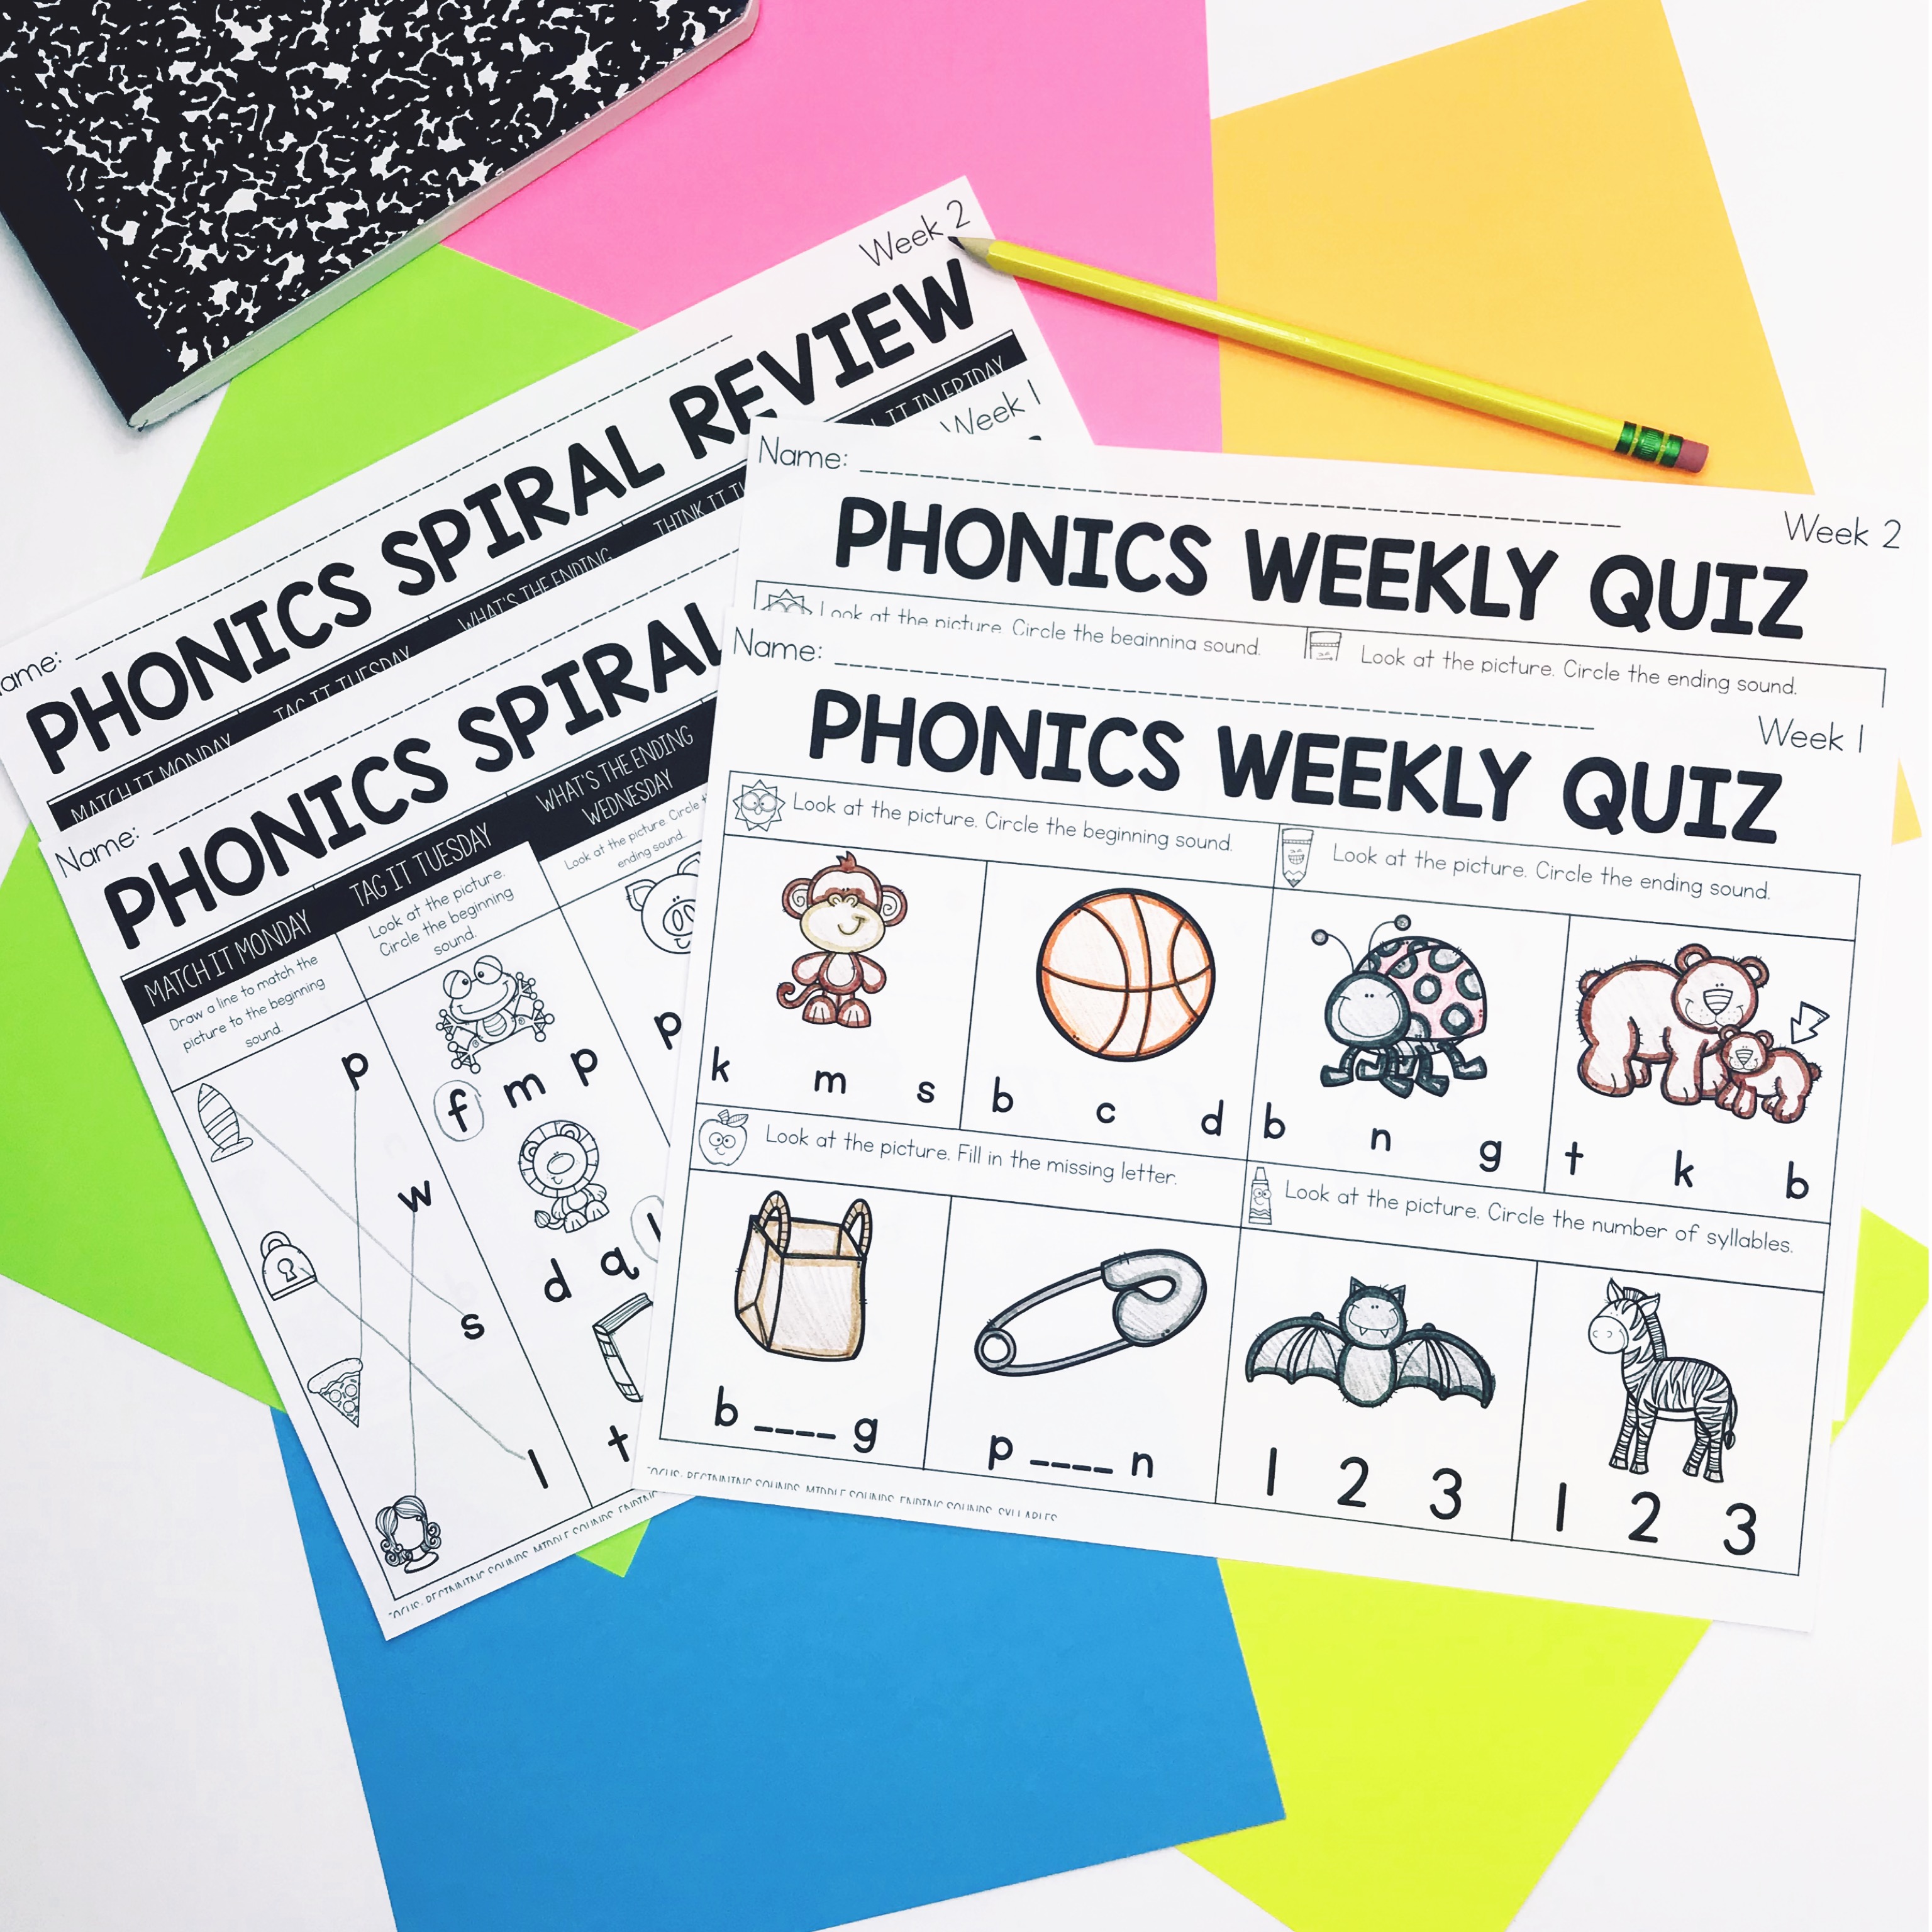 Weekly phonics quizzes